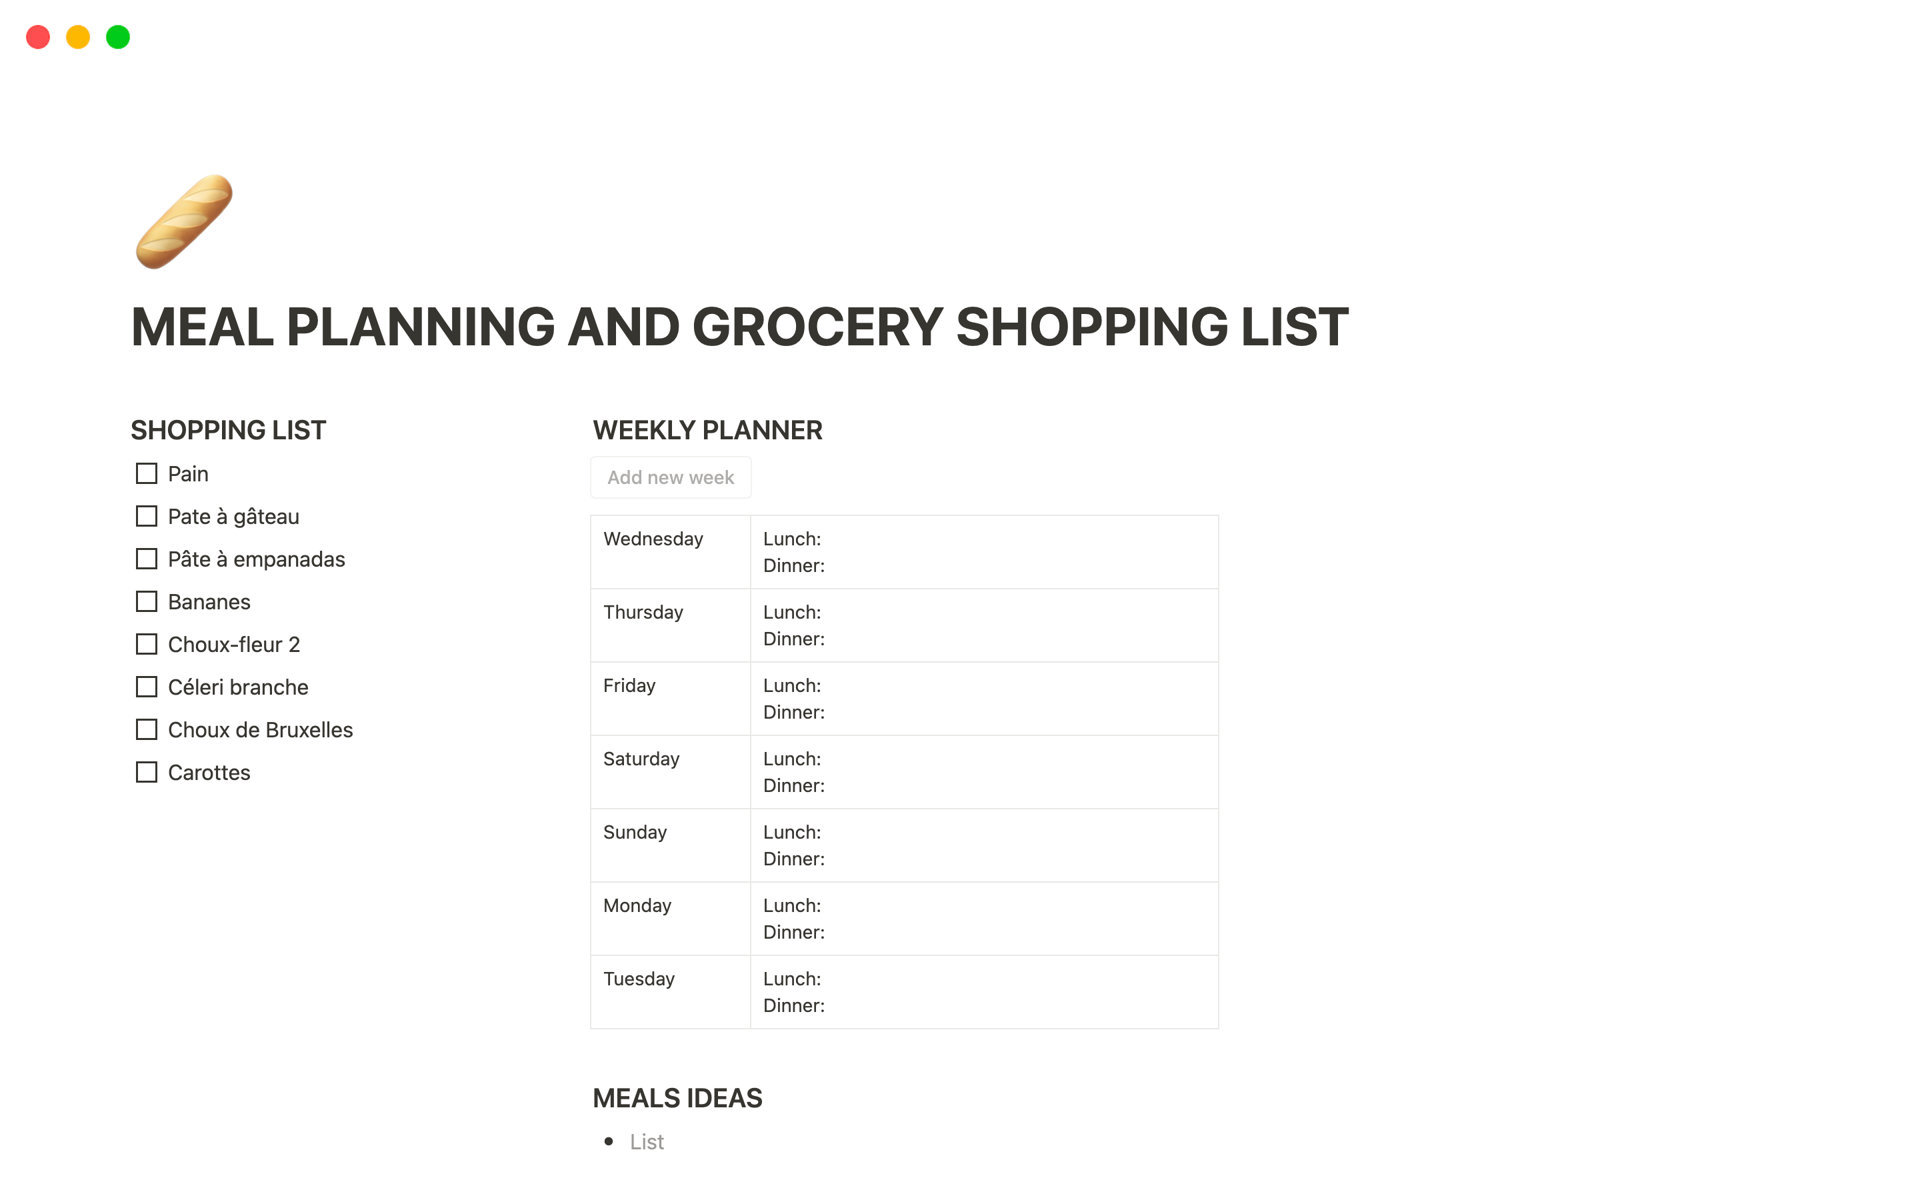 Mallin esikatselu nimelle Meal planning and grocery shopping list